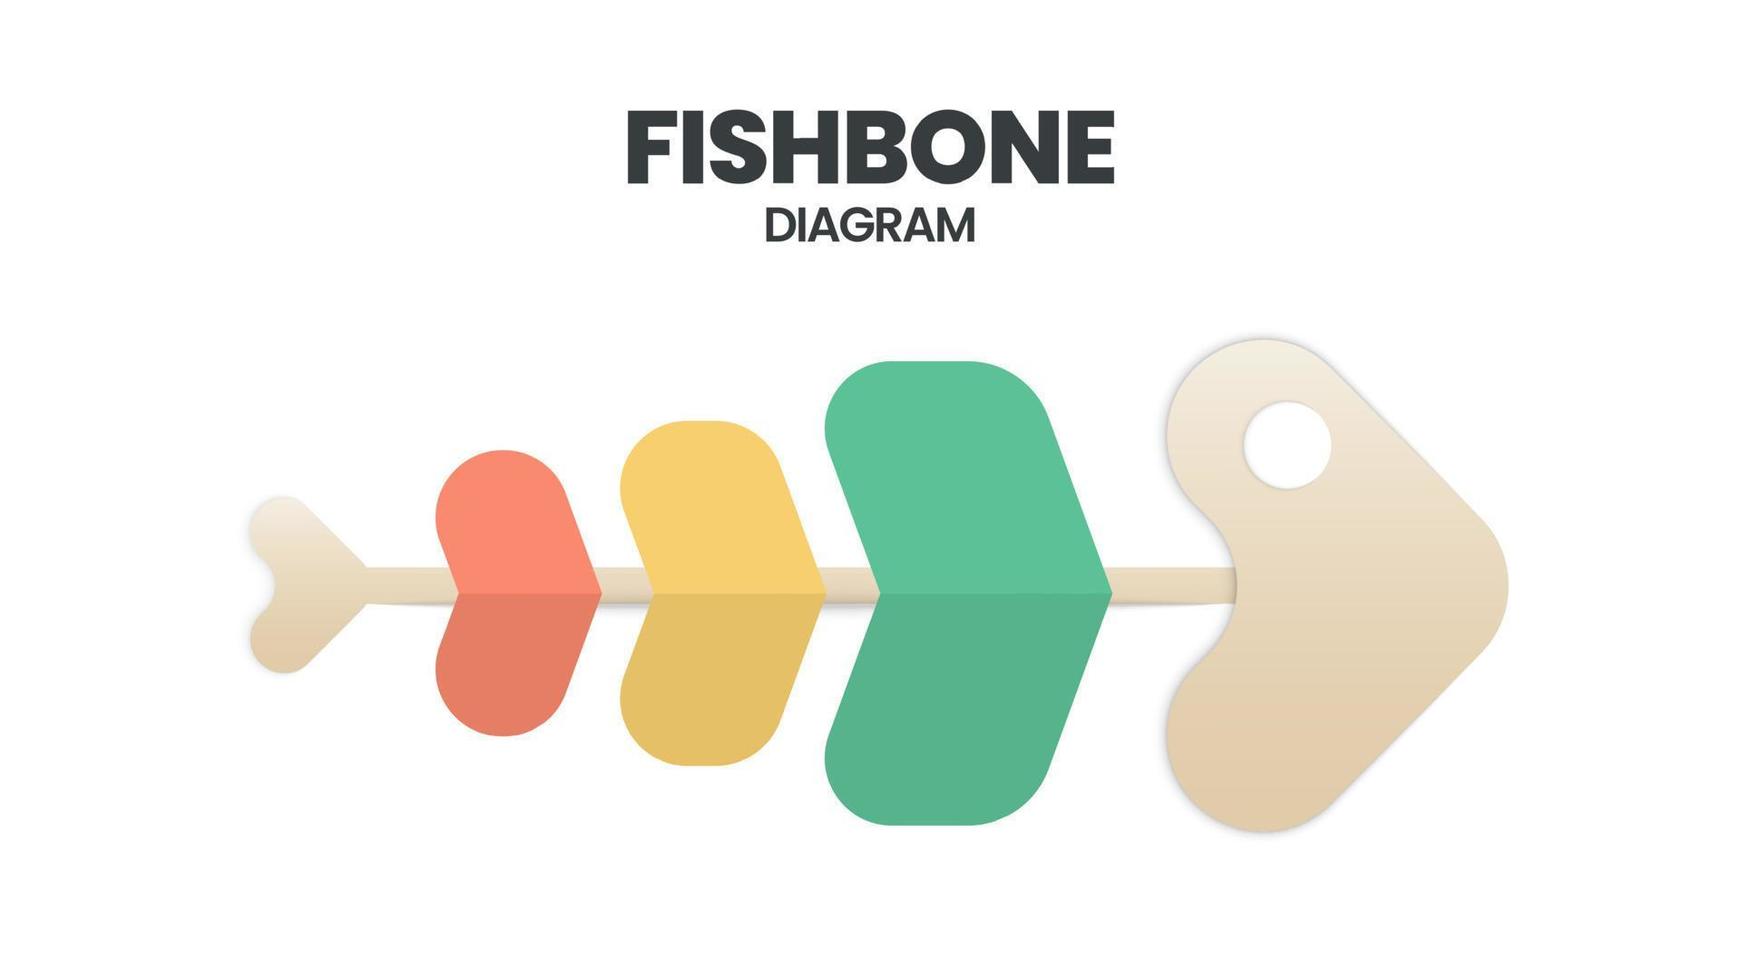 The vector featured a fish skeleton.   A template is a tool to analyze and brainstorm the root causes of an effect and solution. A fishbone diagram presentation is a cause-and-effect Ishikawa diagram.